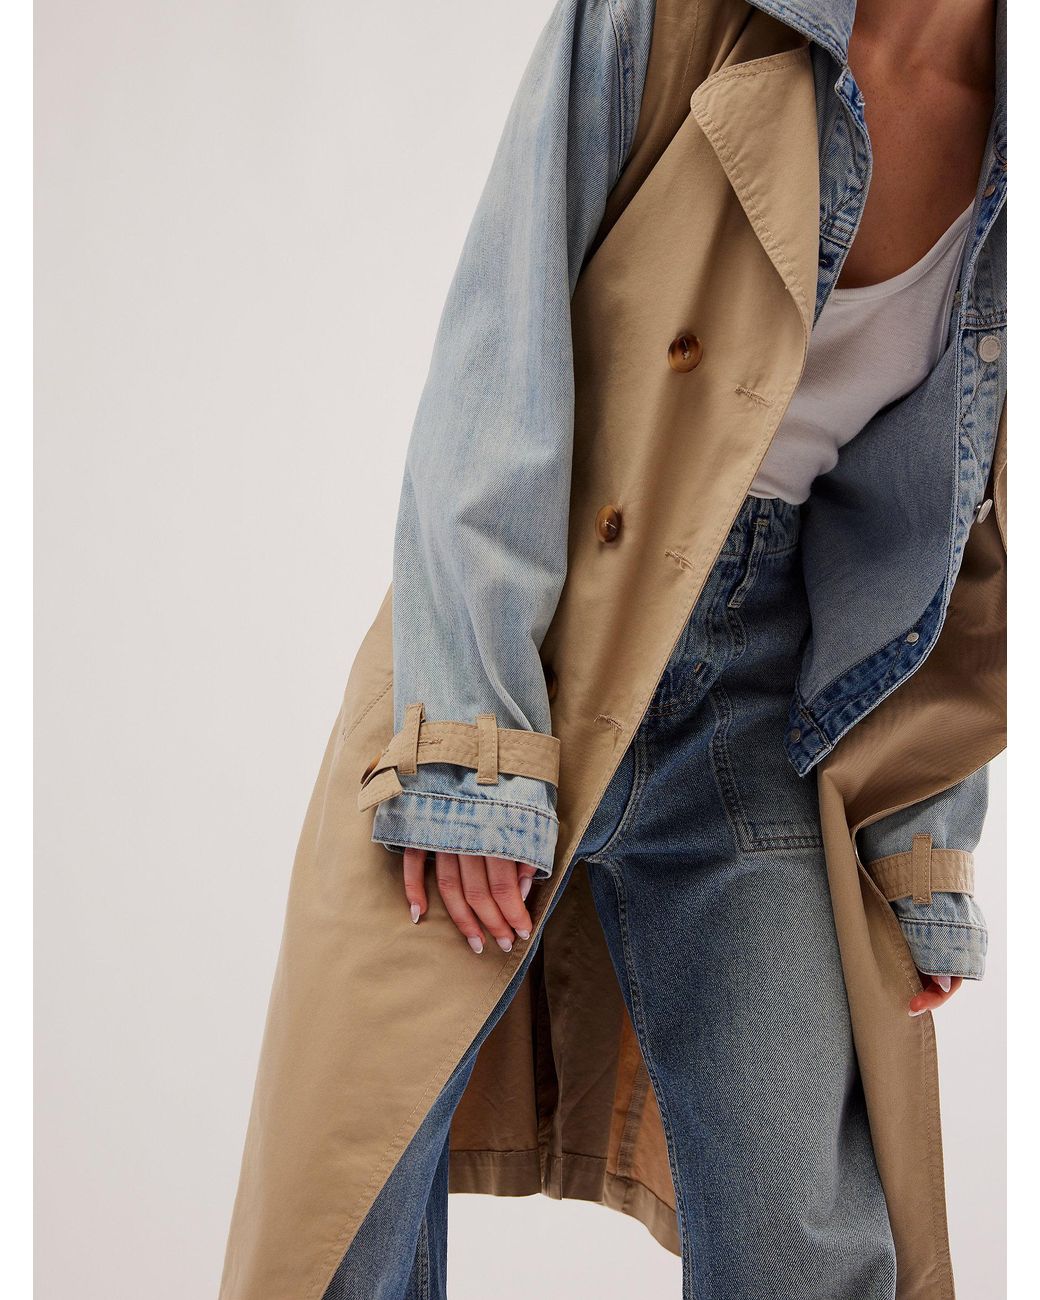 Free People Blanknyc First Row Trench Coat | Lyst